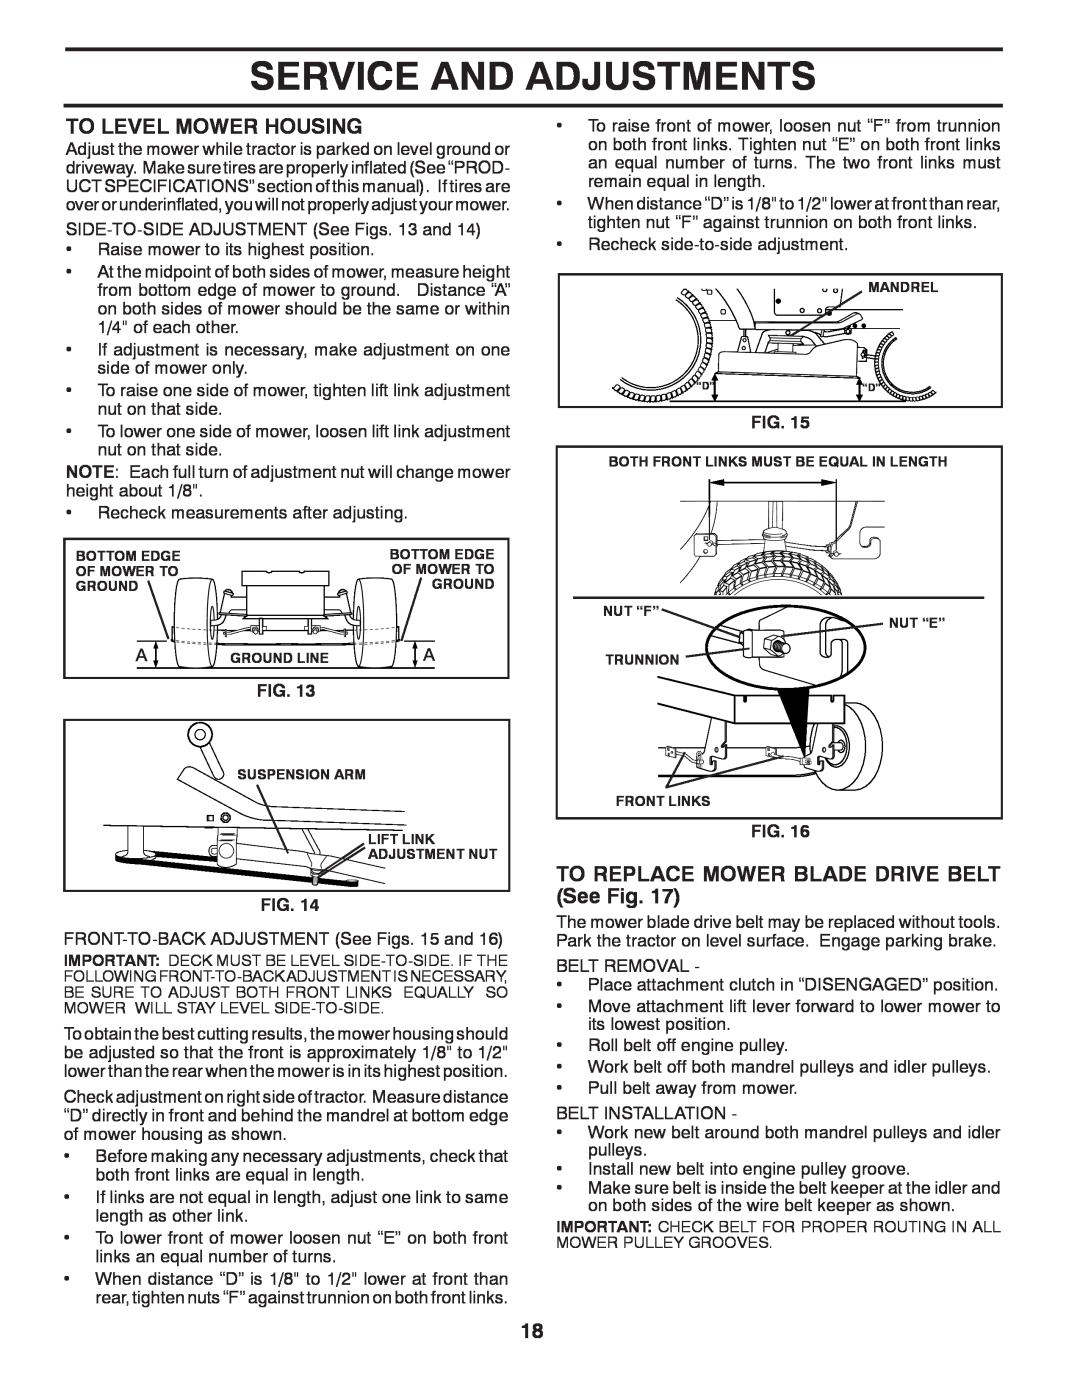 McCulloch 532 40 80-72 manual To Level Mower Housing, TO REPLACE MOWER BLADE DRIVE BELT See Fig, Service And Adjustments 